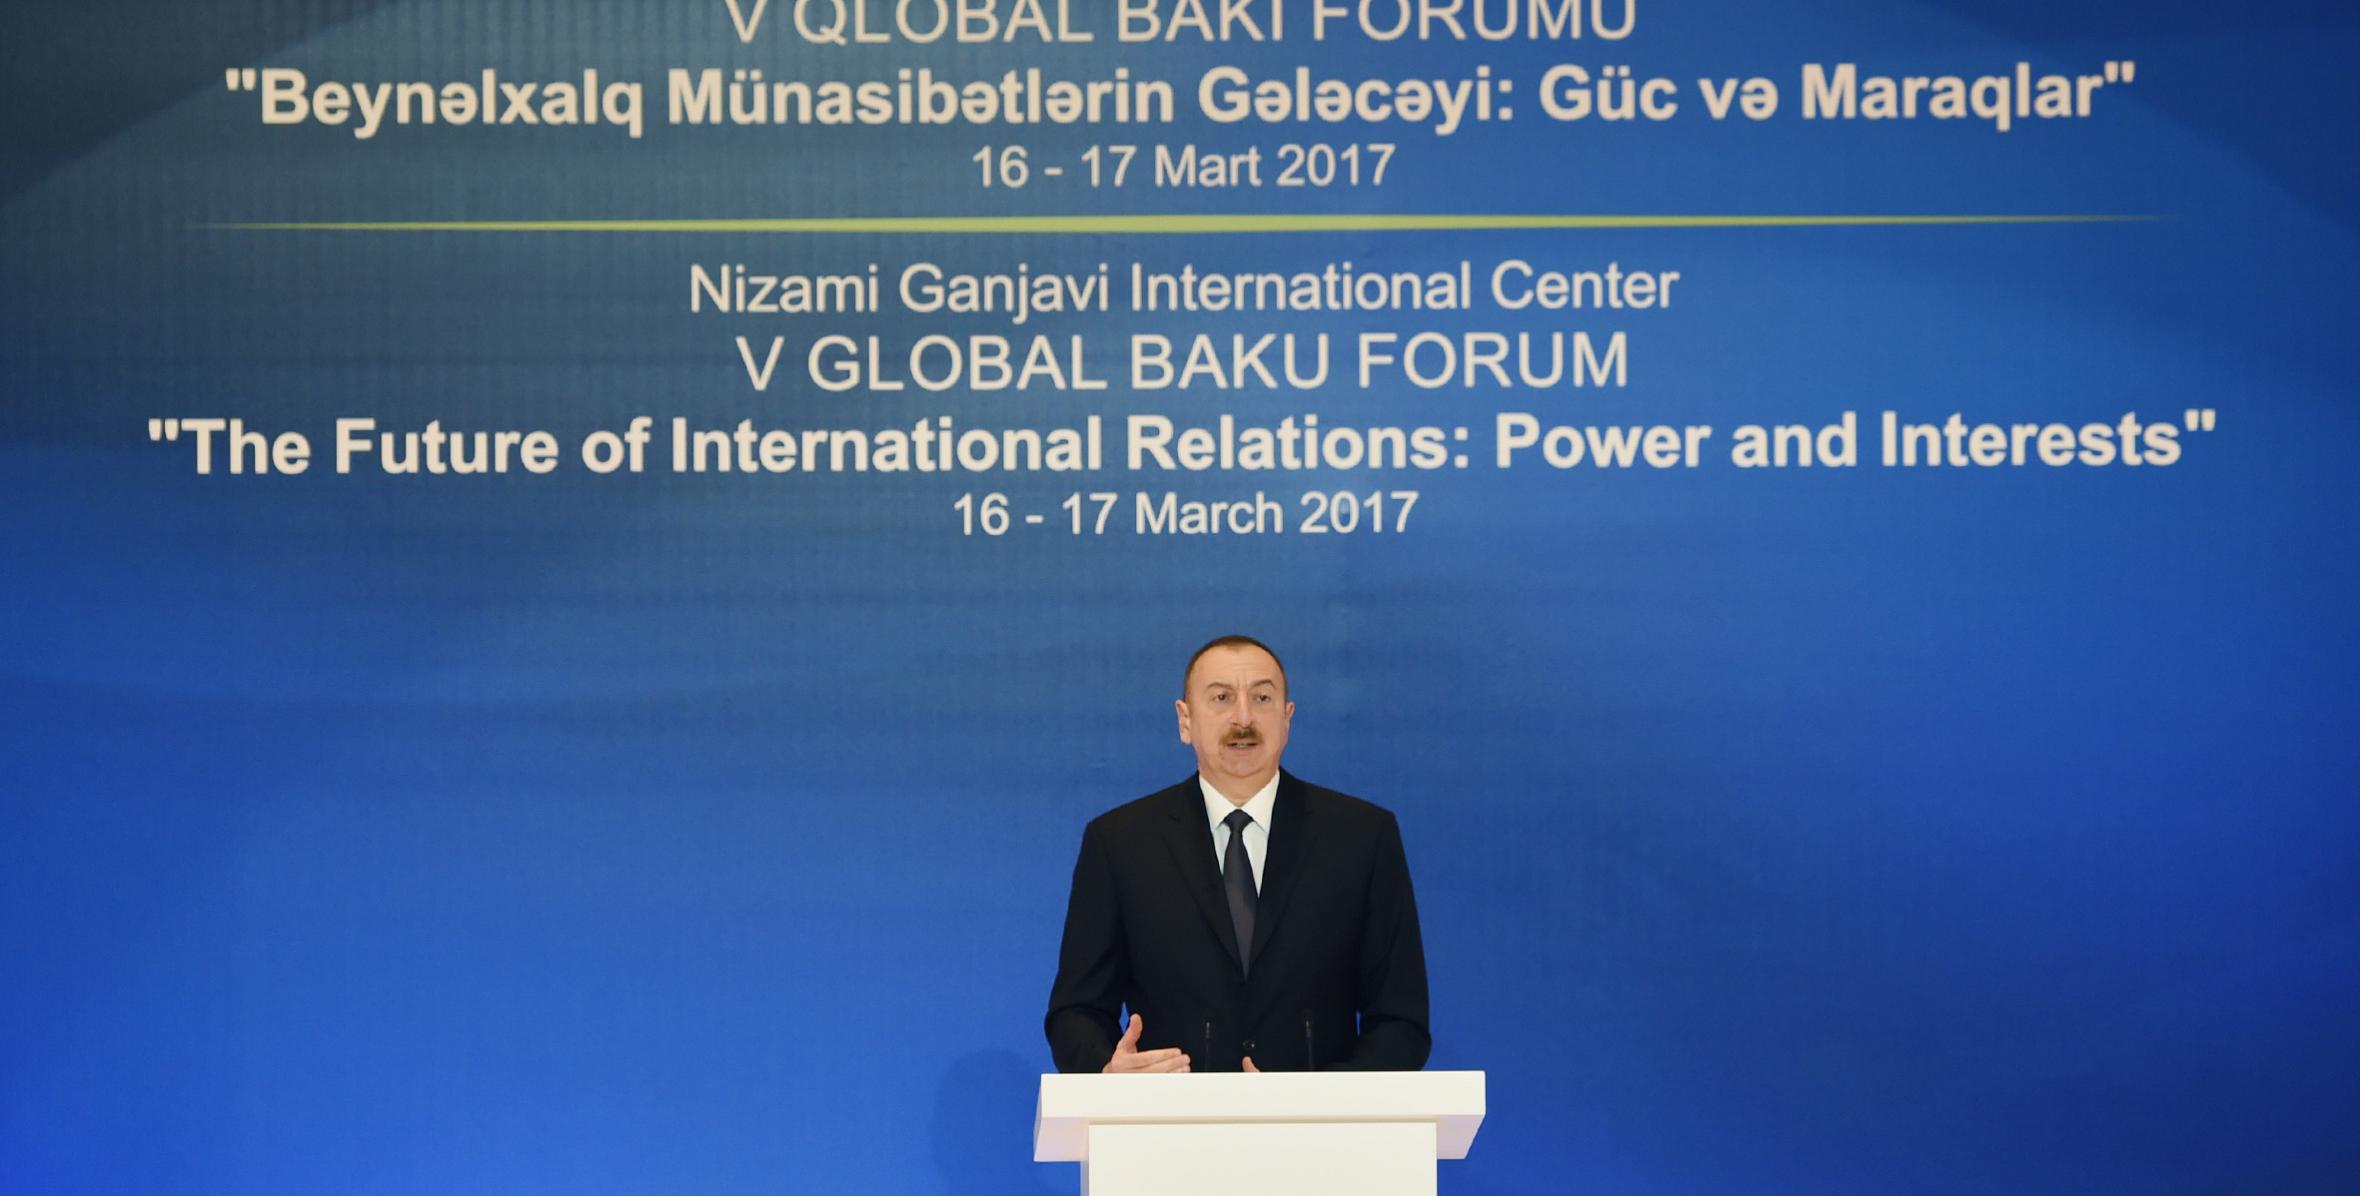 Speech by Ilham Aliyev at the opening of 5th Global Baku Forum